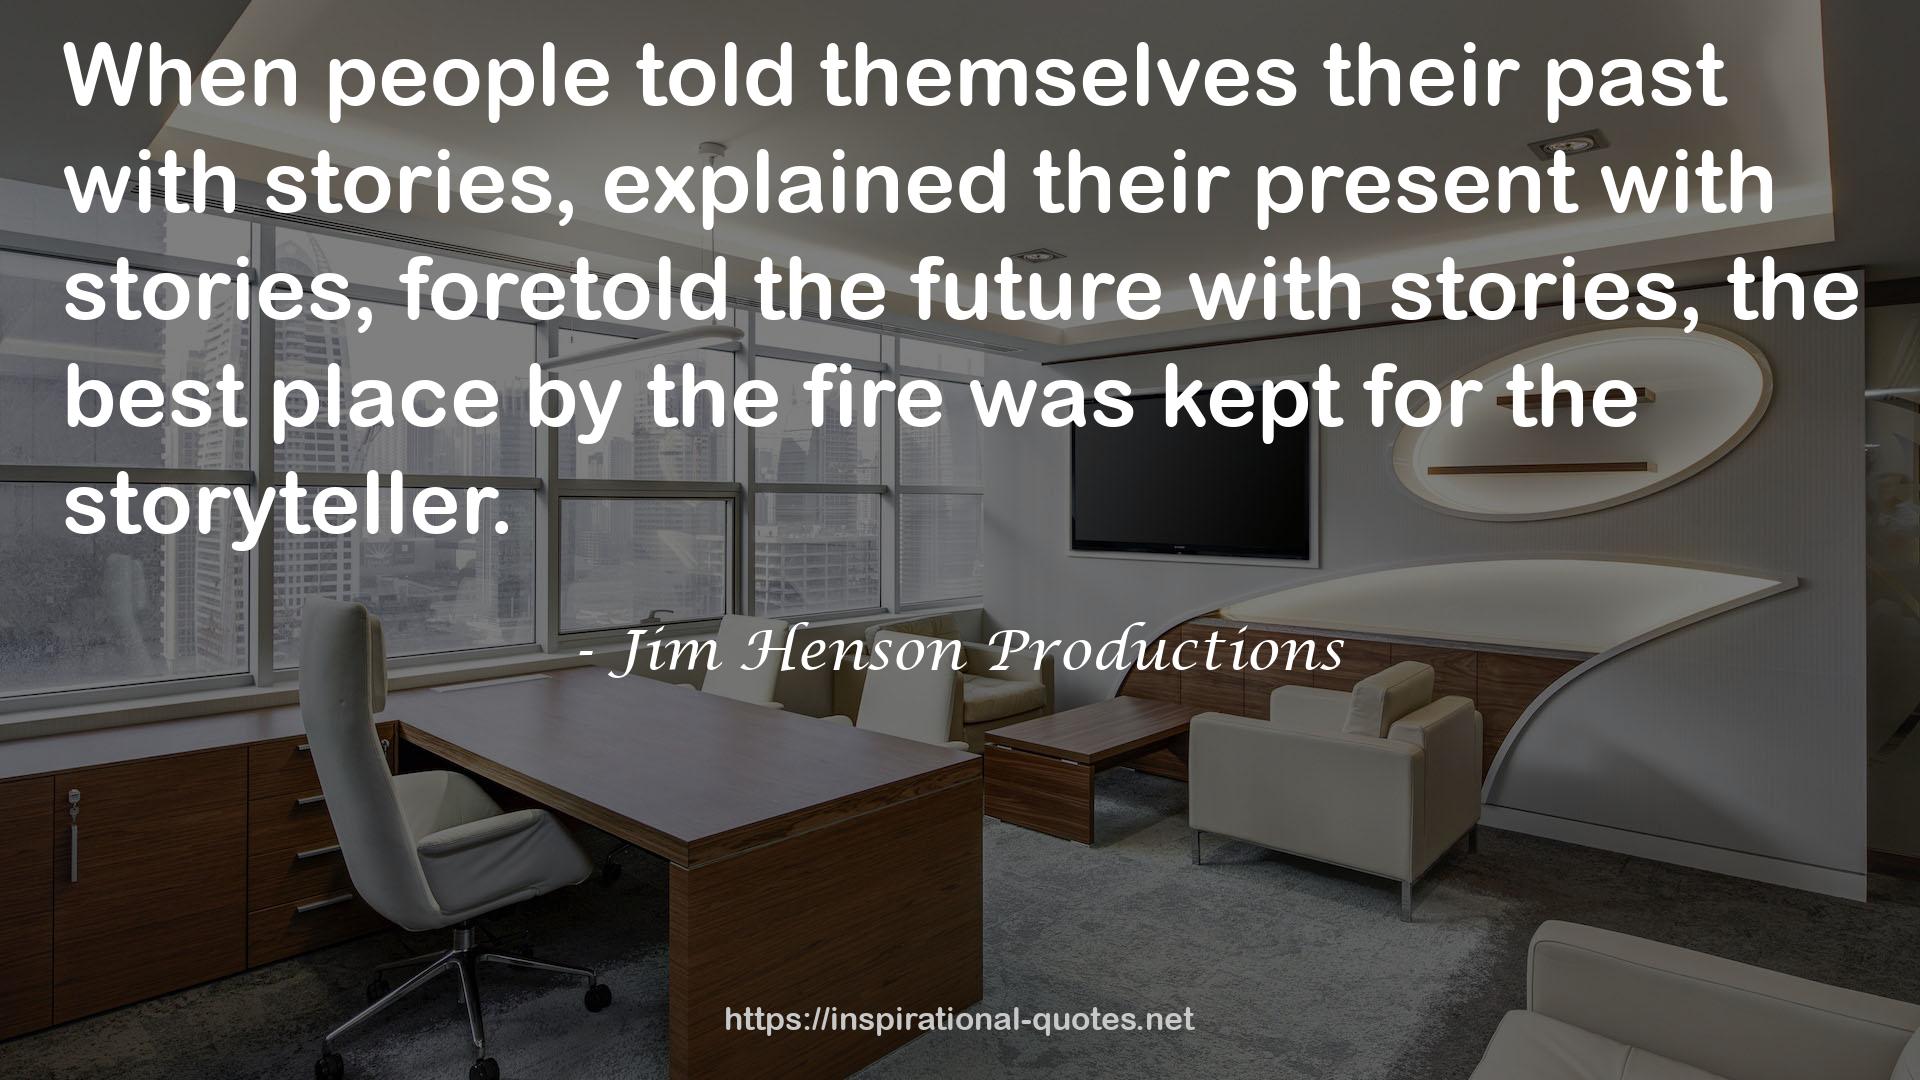 Jim Henson Productions QUOTES